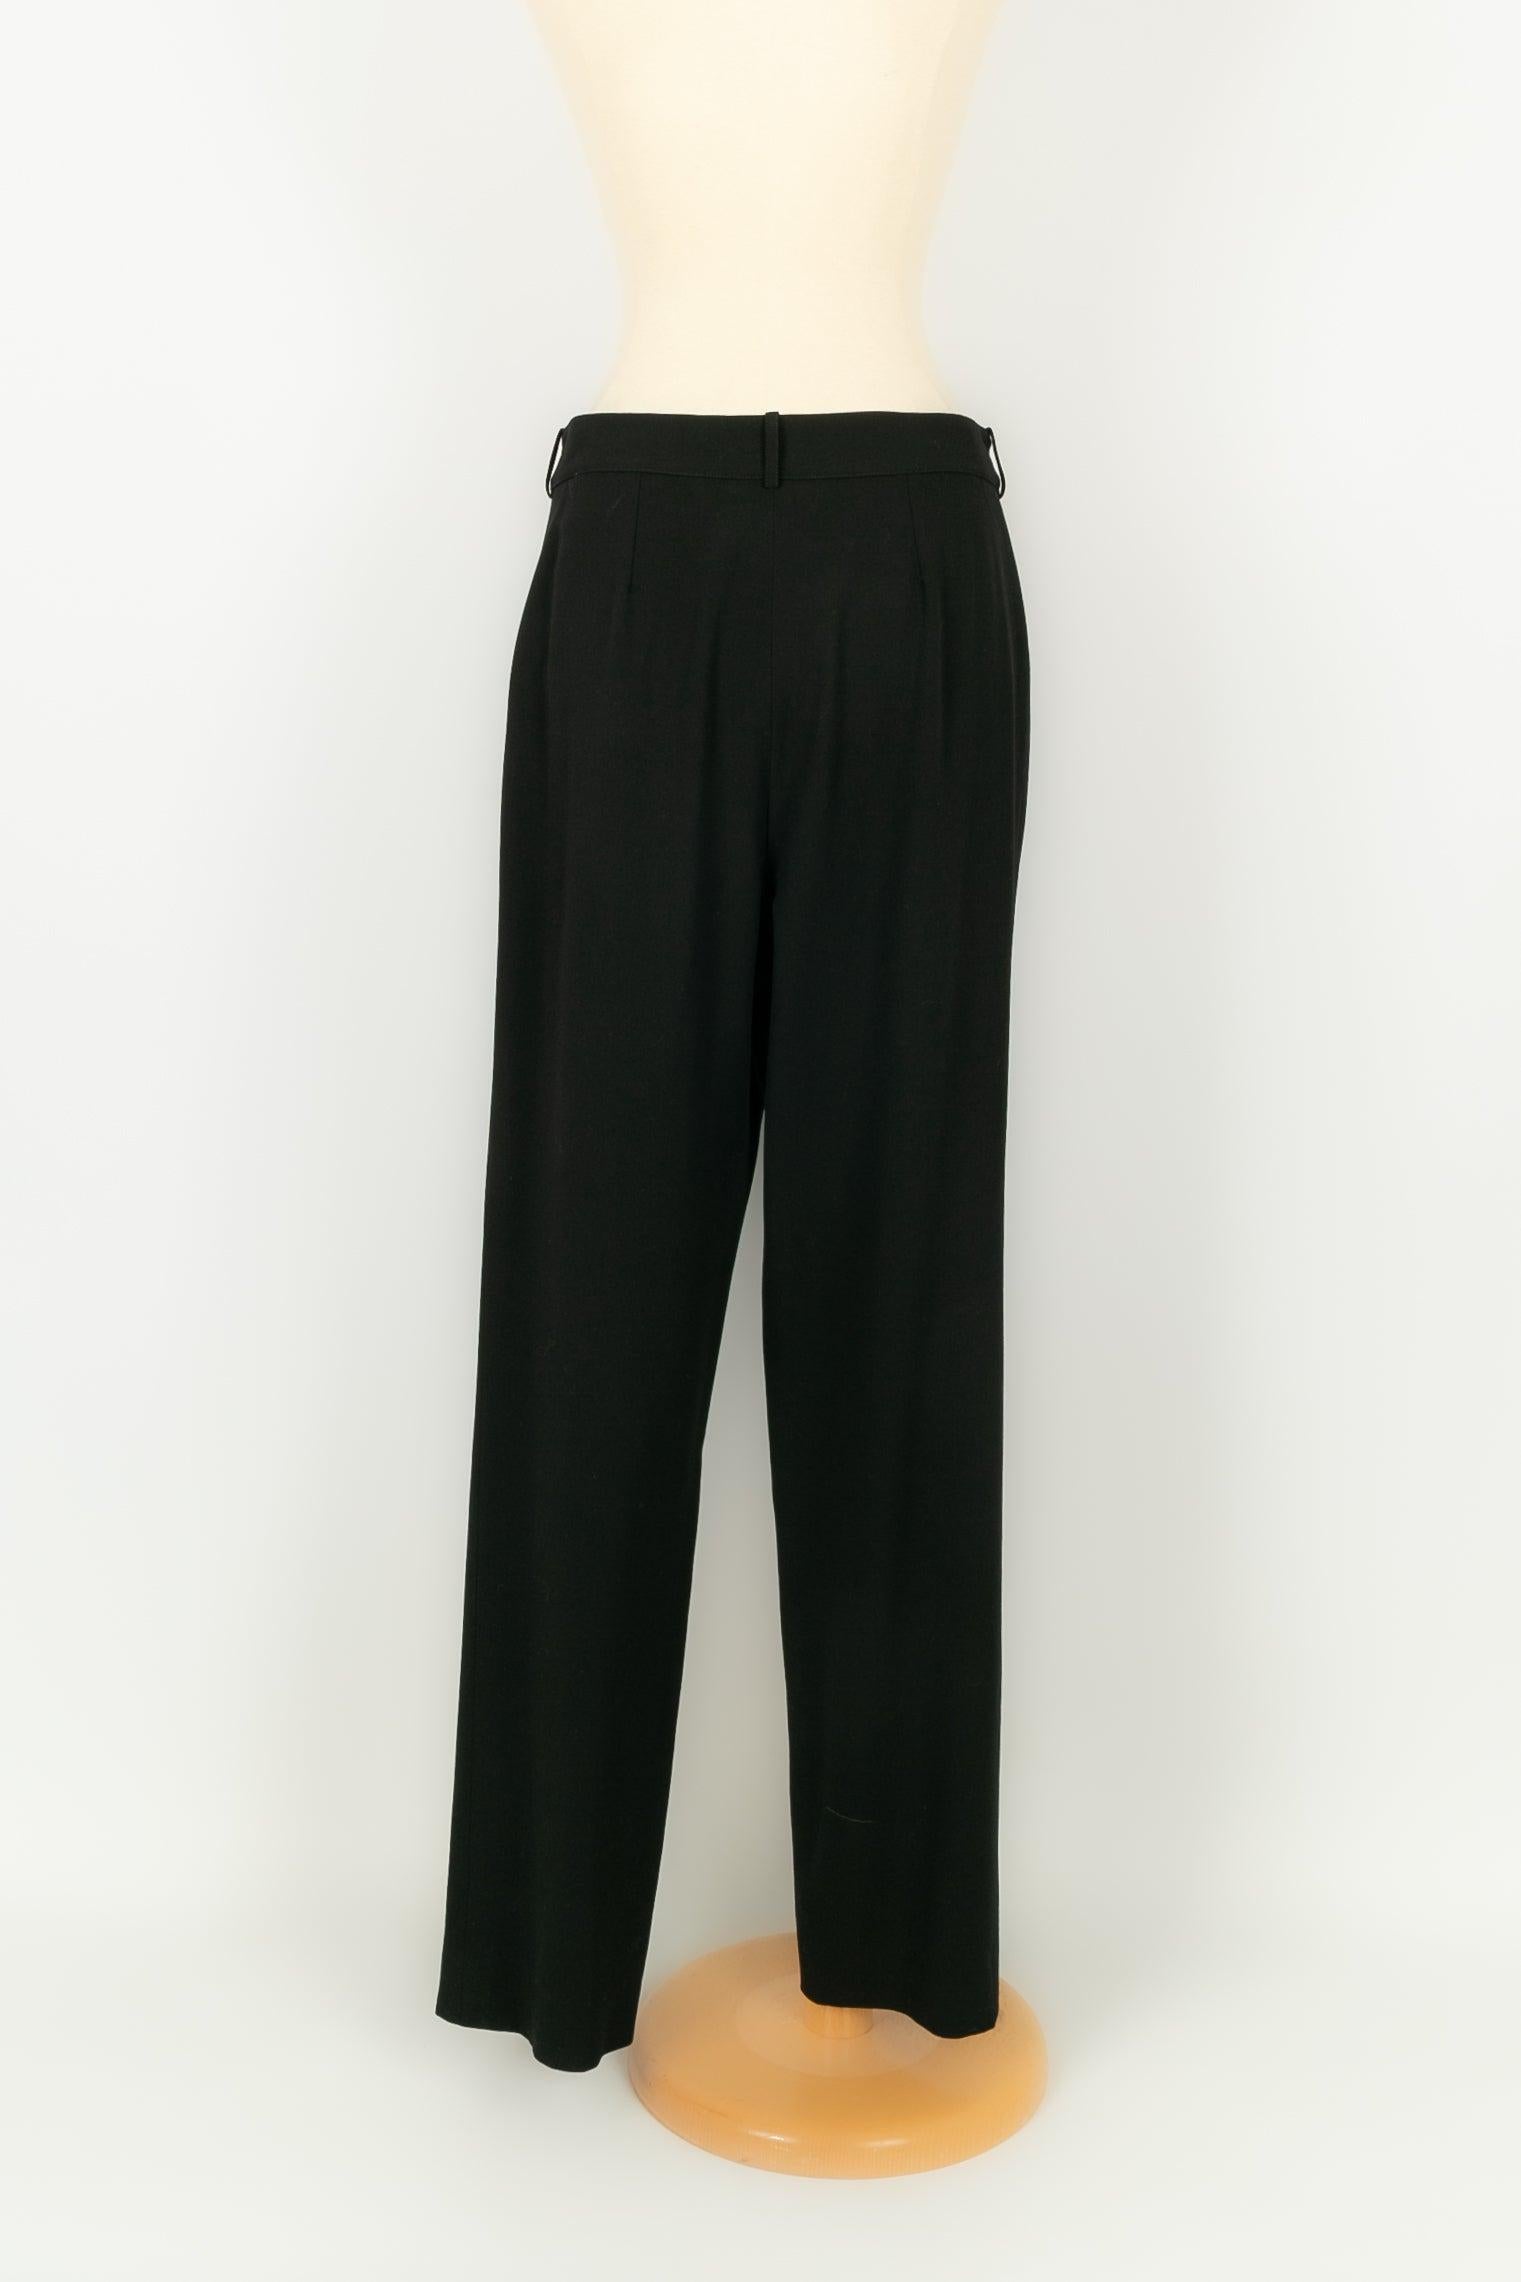 Chanel Suit Set of Jacket and Pants in Black Wool, 1997 For Sale 5